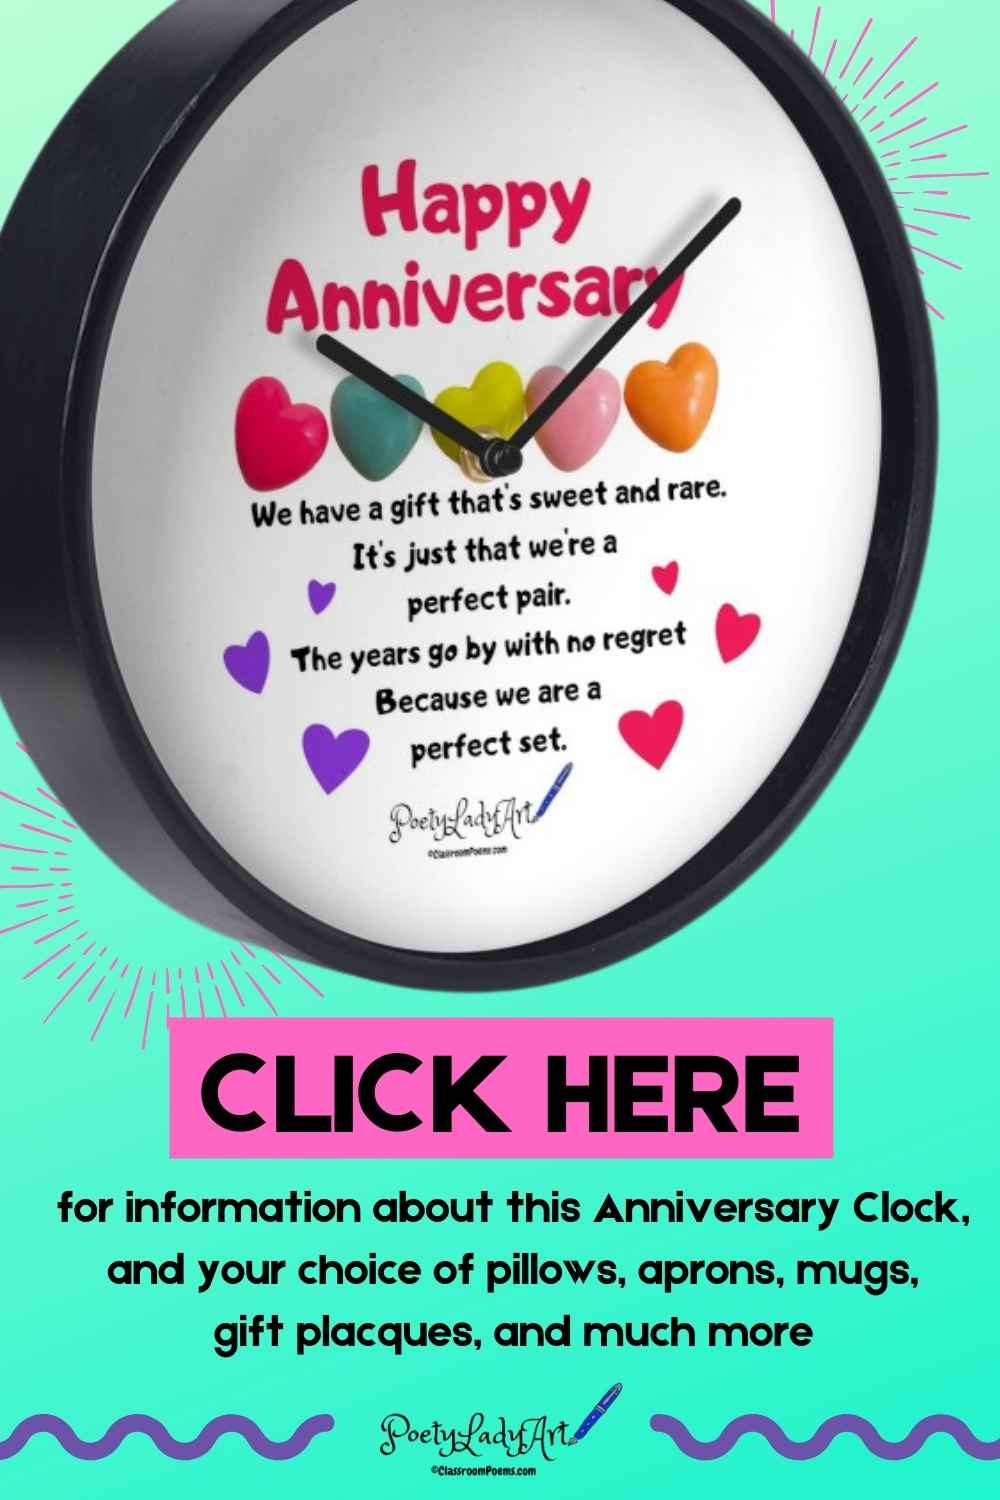 anniversary gifts,
anniversary gifts for him,
anniversary gifts for her,
ideas for anniversary gifts,
anniversary gifts ideas,
anniversary gifts husband,
anniversary gifts wife,